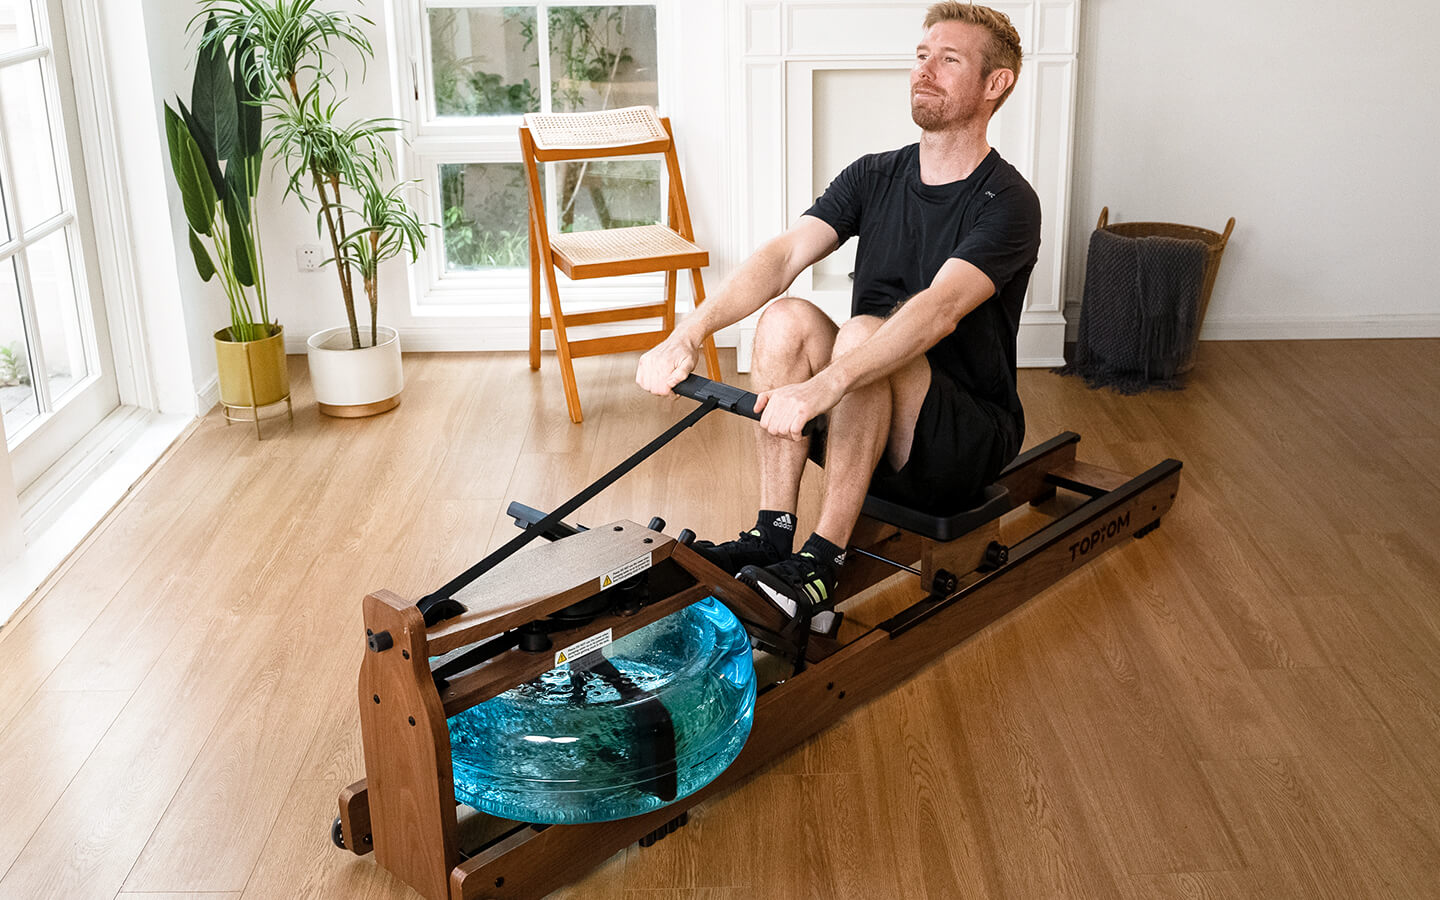 How To Make Home Rowing Machine A Cost-effective Buy? - Topiom